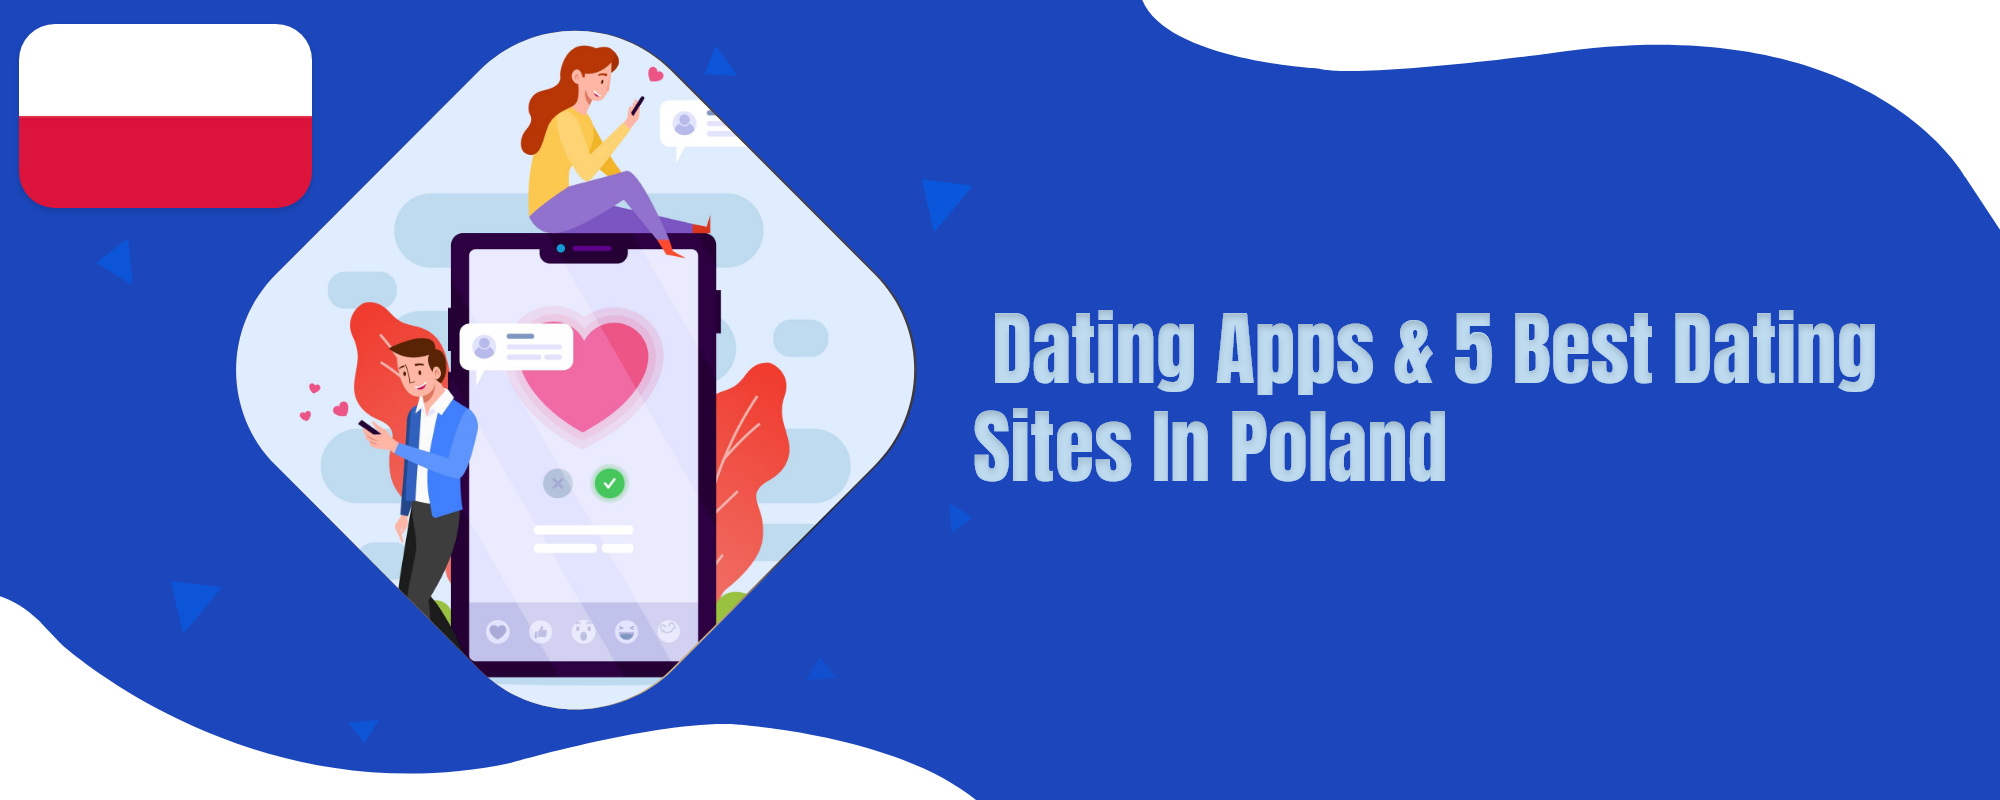 Dating sites in Poland